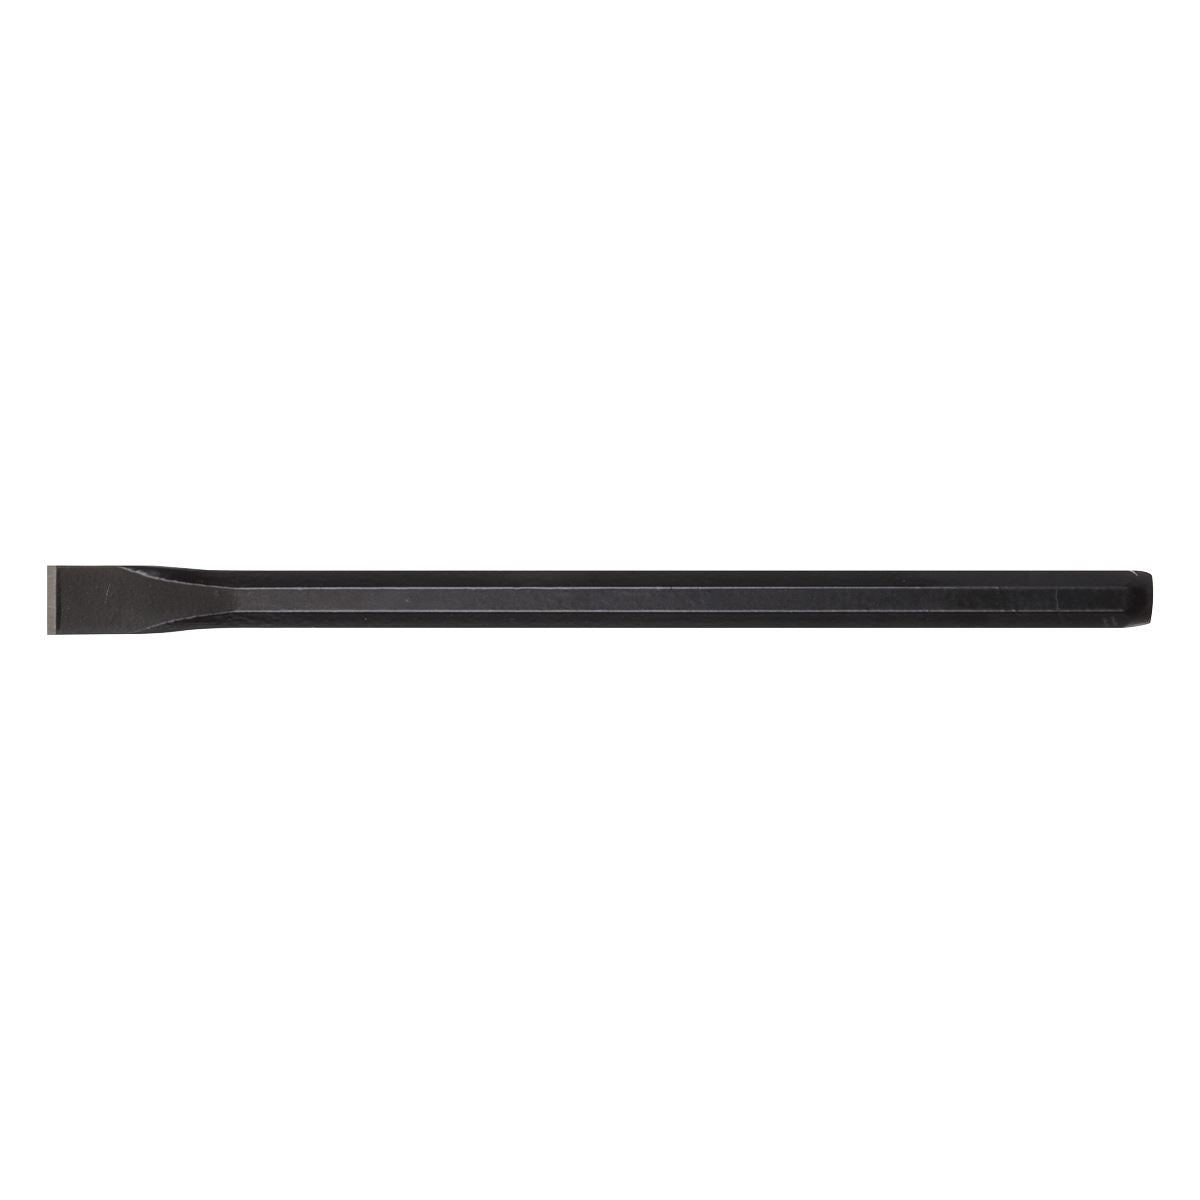 Sealey Cold Chisel 19 x 300mm